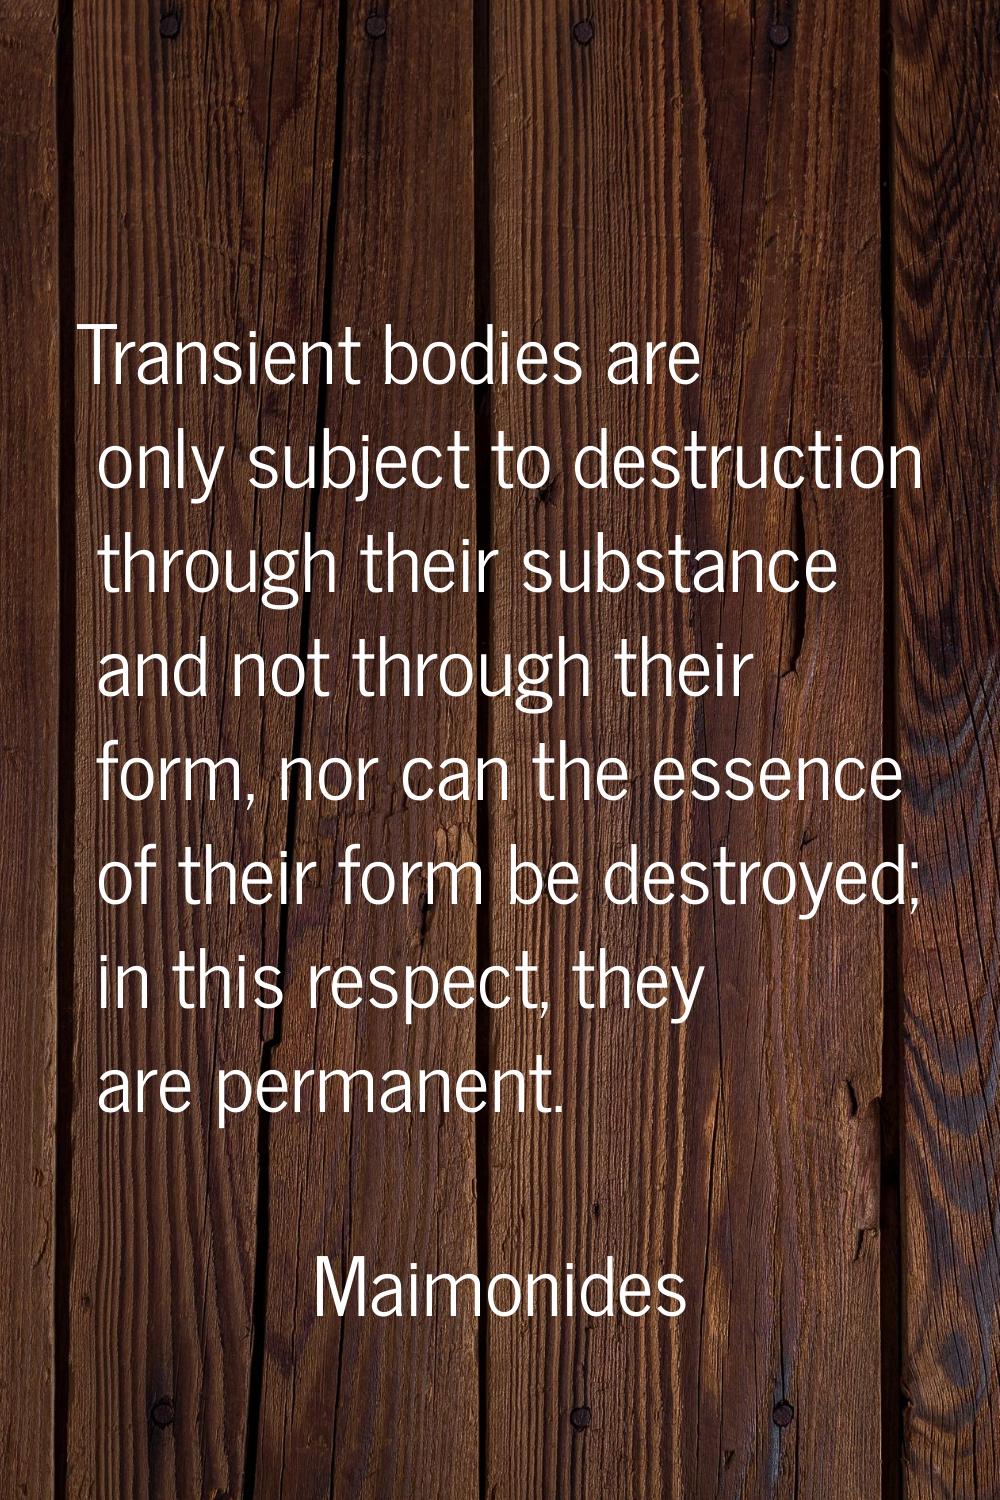 Transient bodies are only subject to destruction through their substance and not through their form